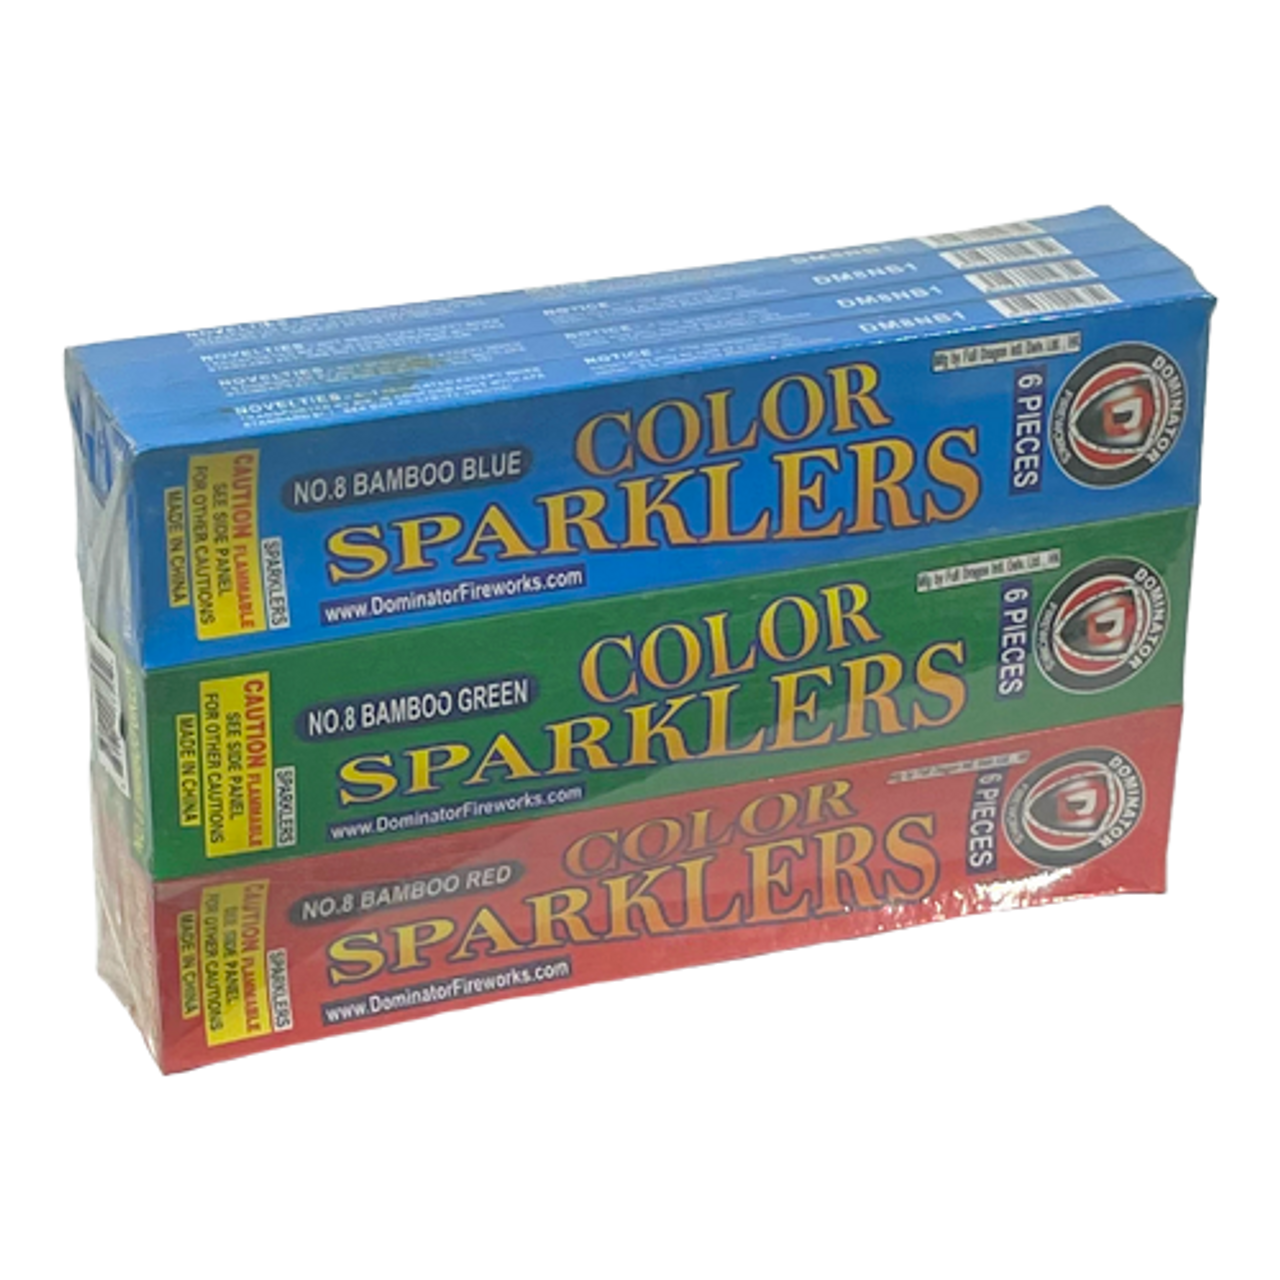 #8 BAMBOO COLOR SPARKLERS 12/6